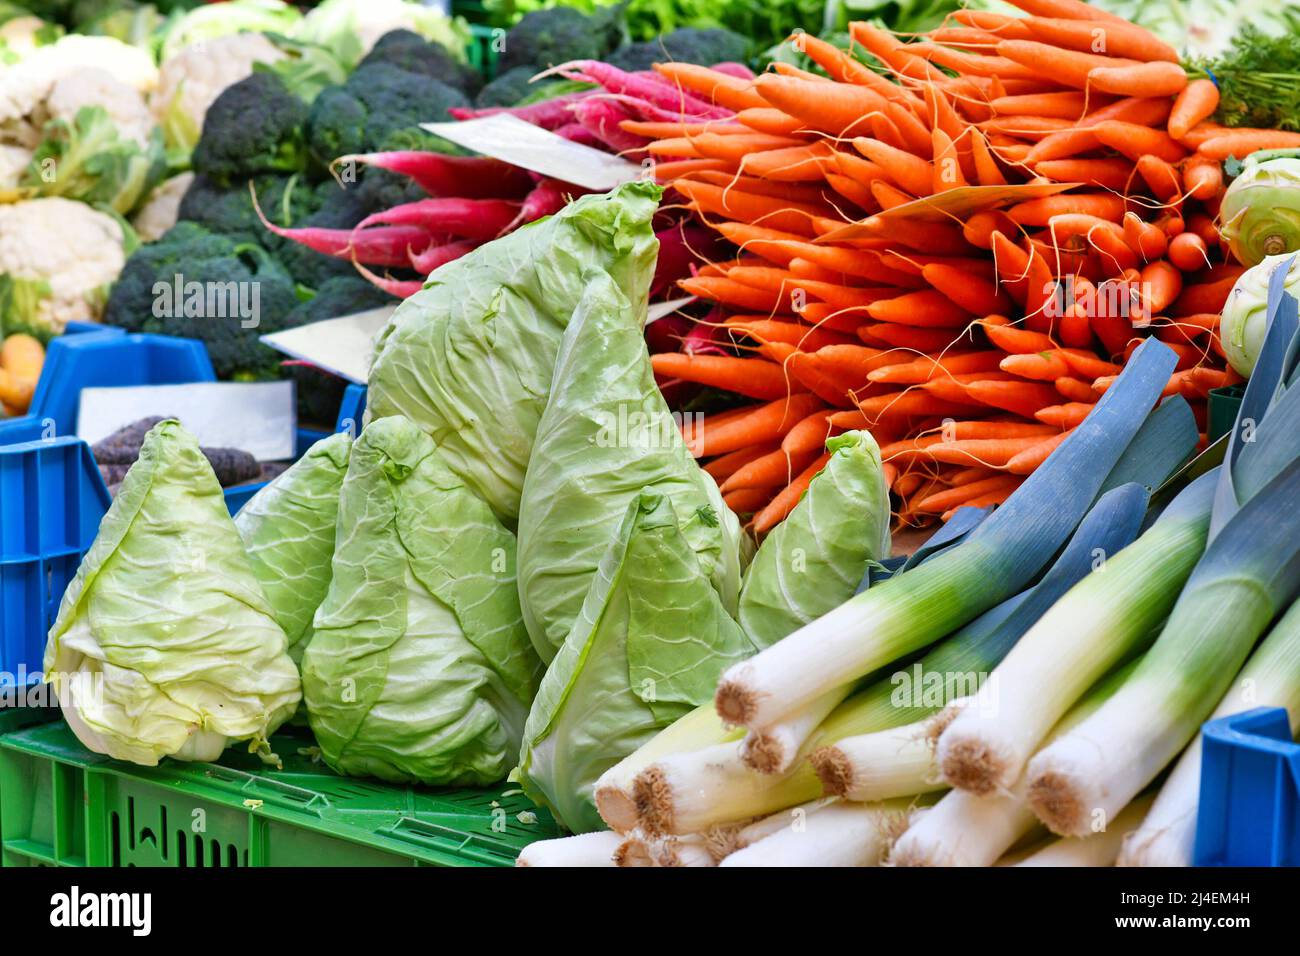 Vegetables like pointed cabbage and carrots at market sale booth Stock Photo